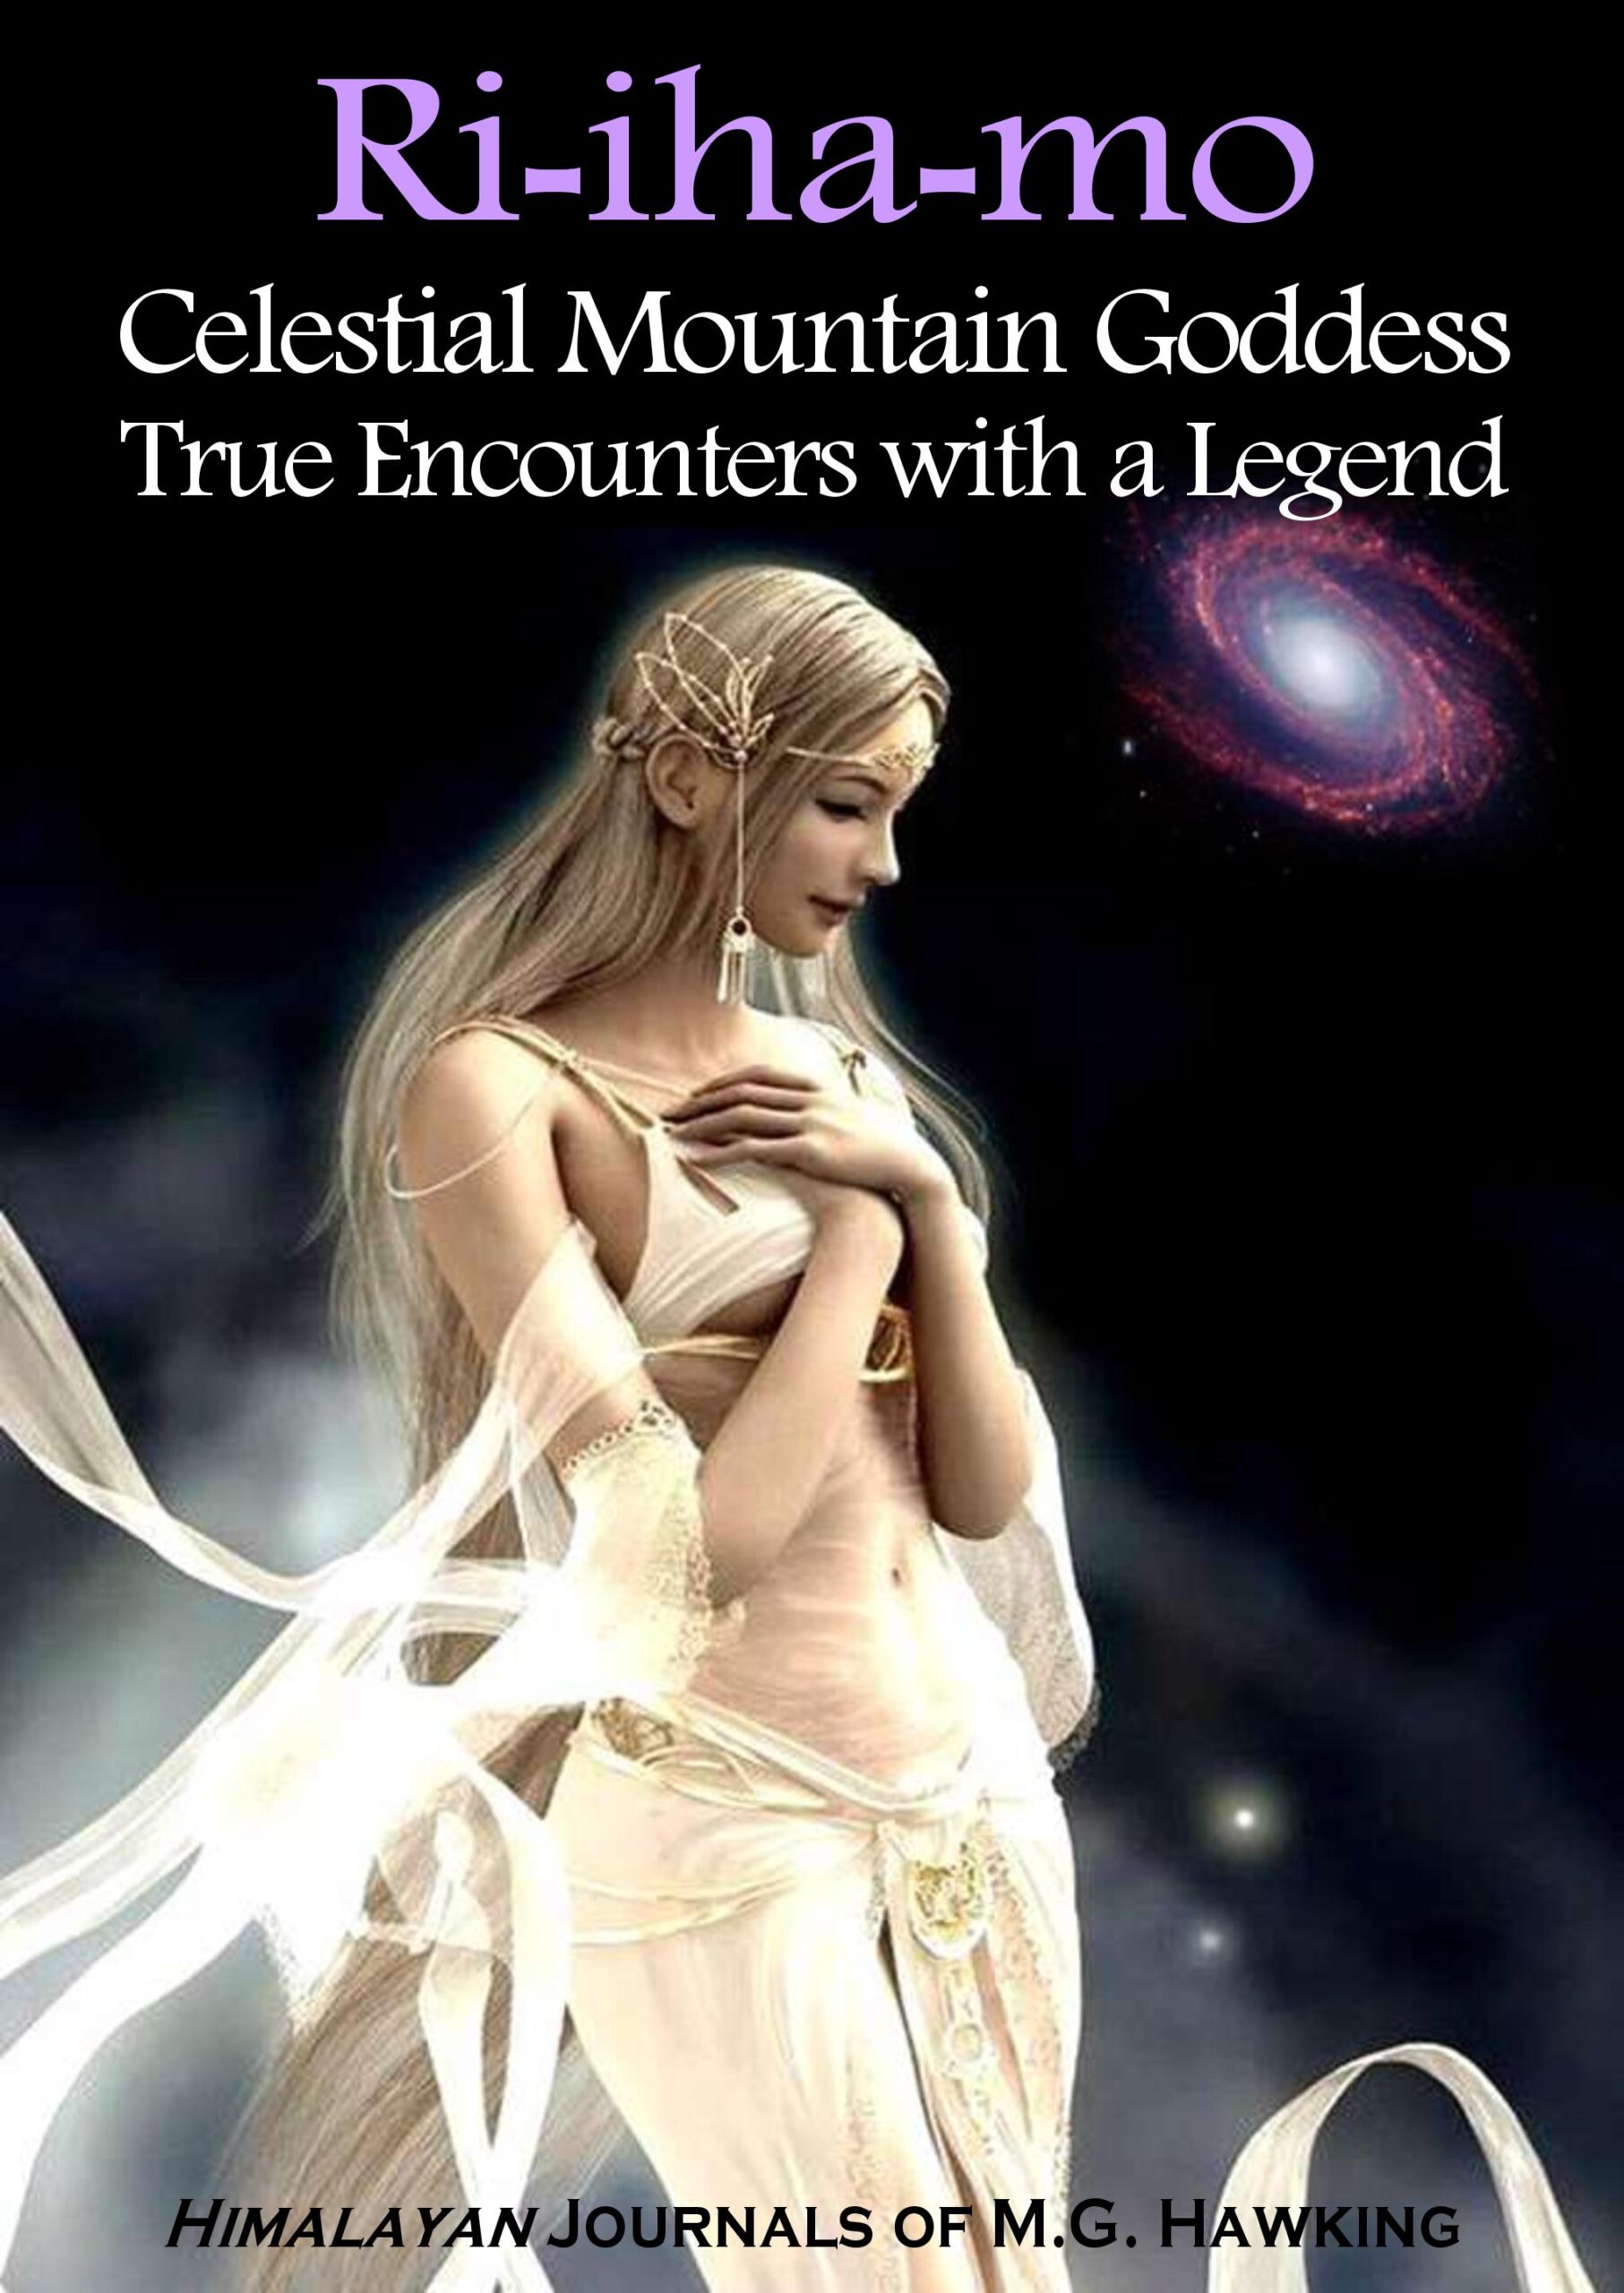 FREE: Ri-iha-mo, Celestial Mountain Goddess: True Encounters with a Legend of the Himalayas by M.G. Hawking